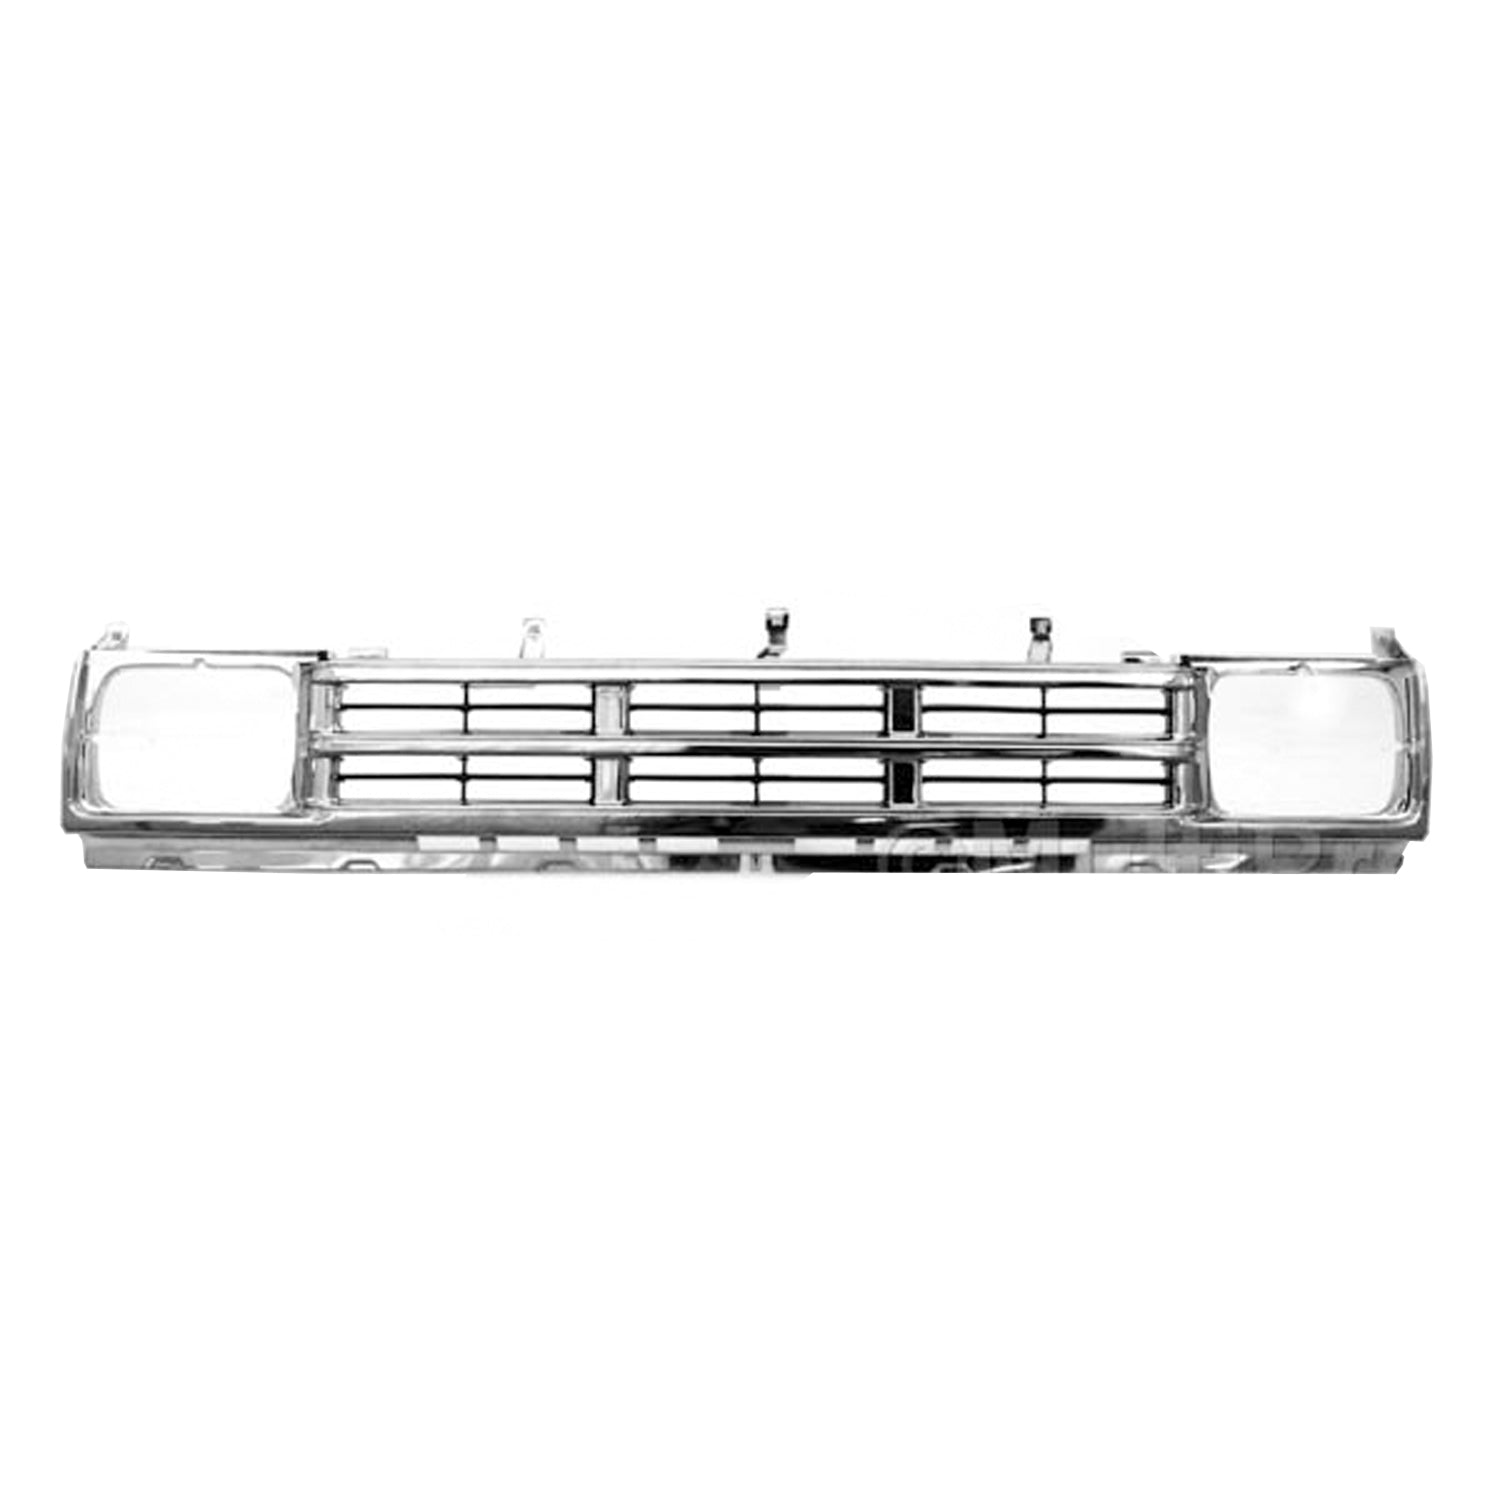 Grille assy 1990 - 1992 NISSAN D21  NI1200121 6231086G20